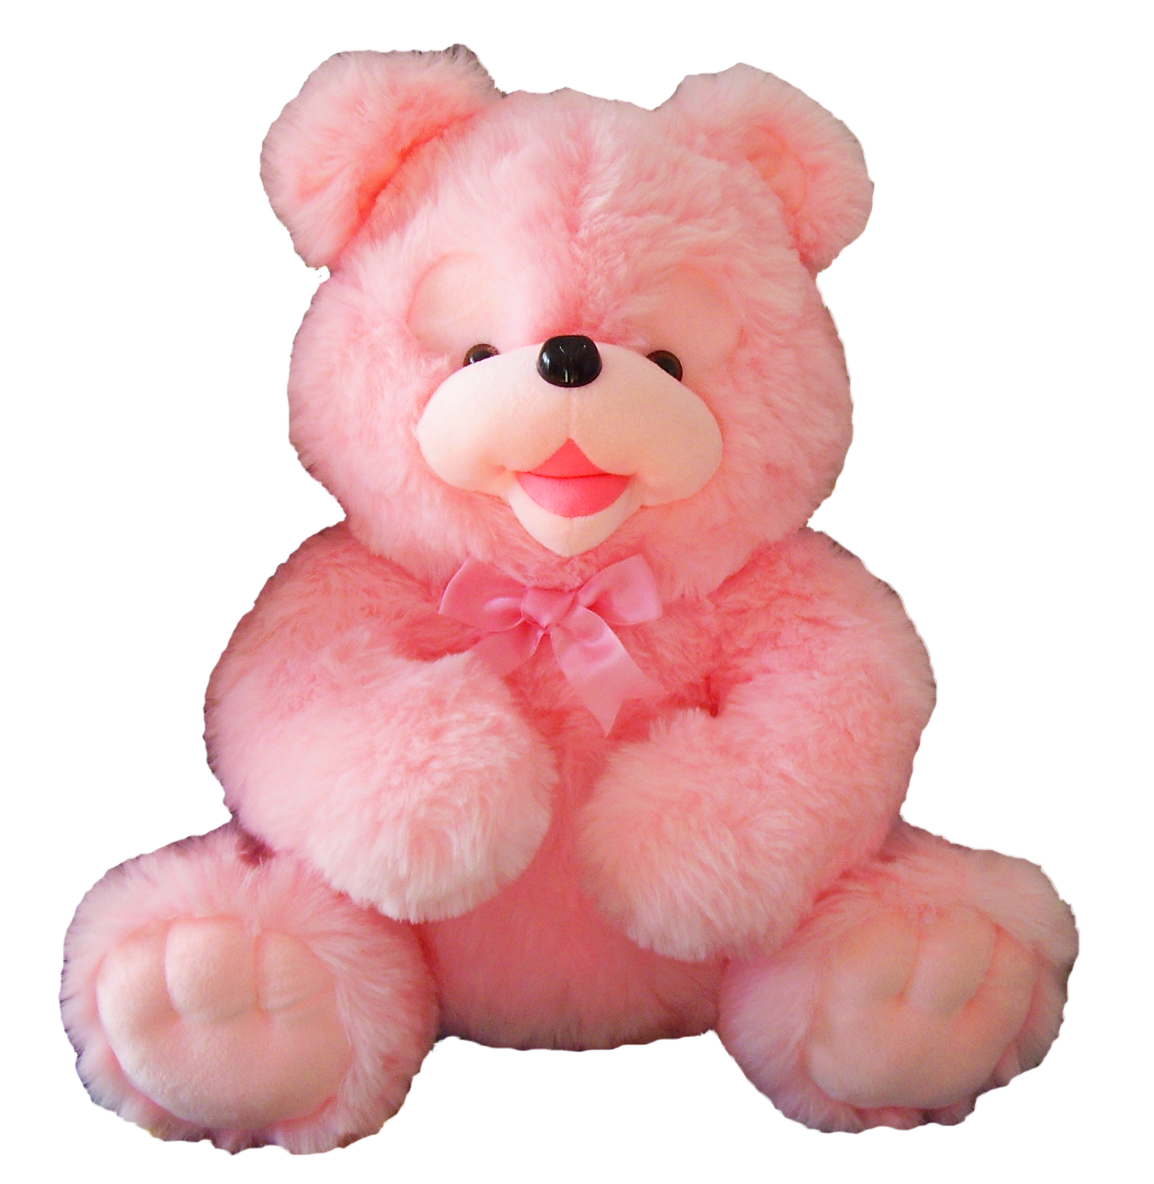 Pink Teddy Bear PNG Image